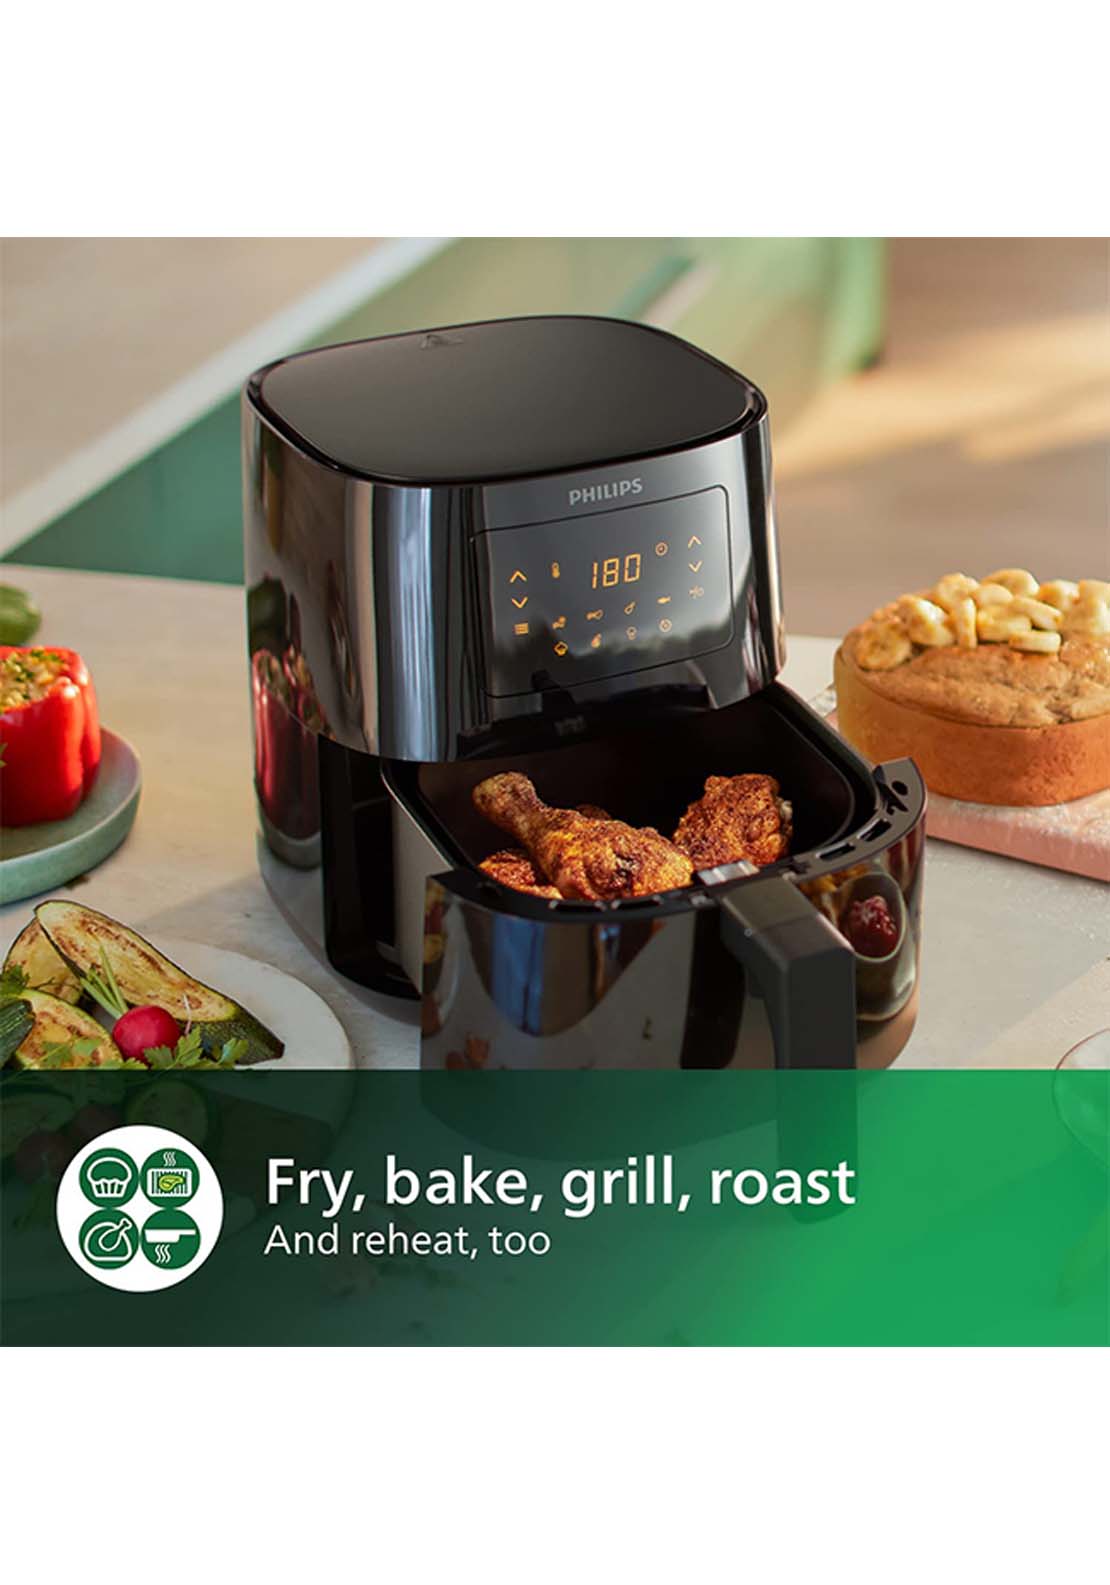 Philips 3000S Air Fryer 4L | Hd925291 4 Shaws Department Stores